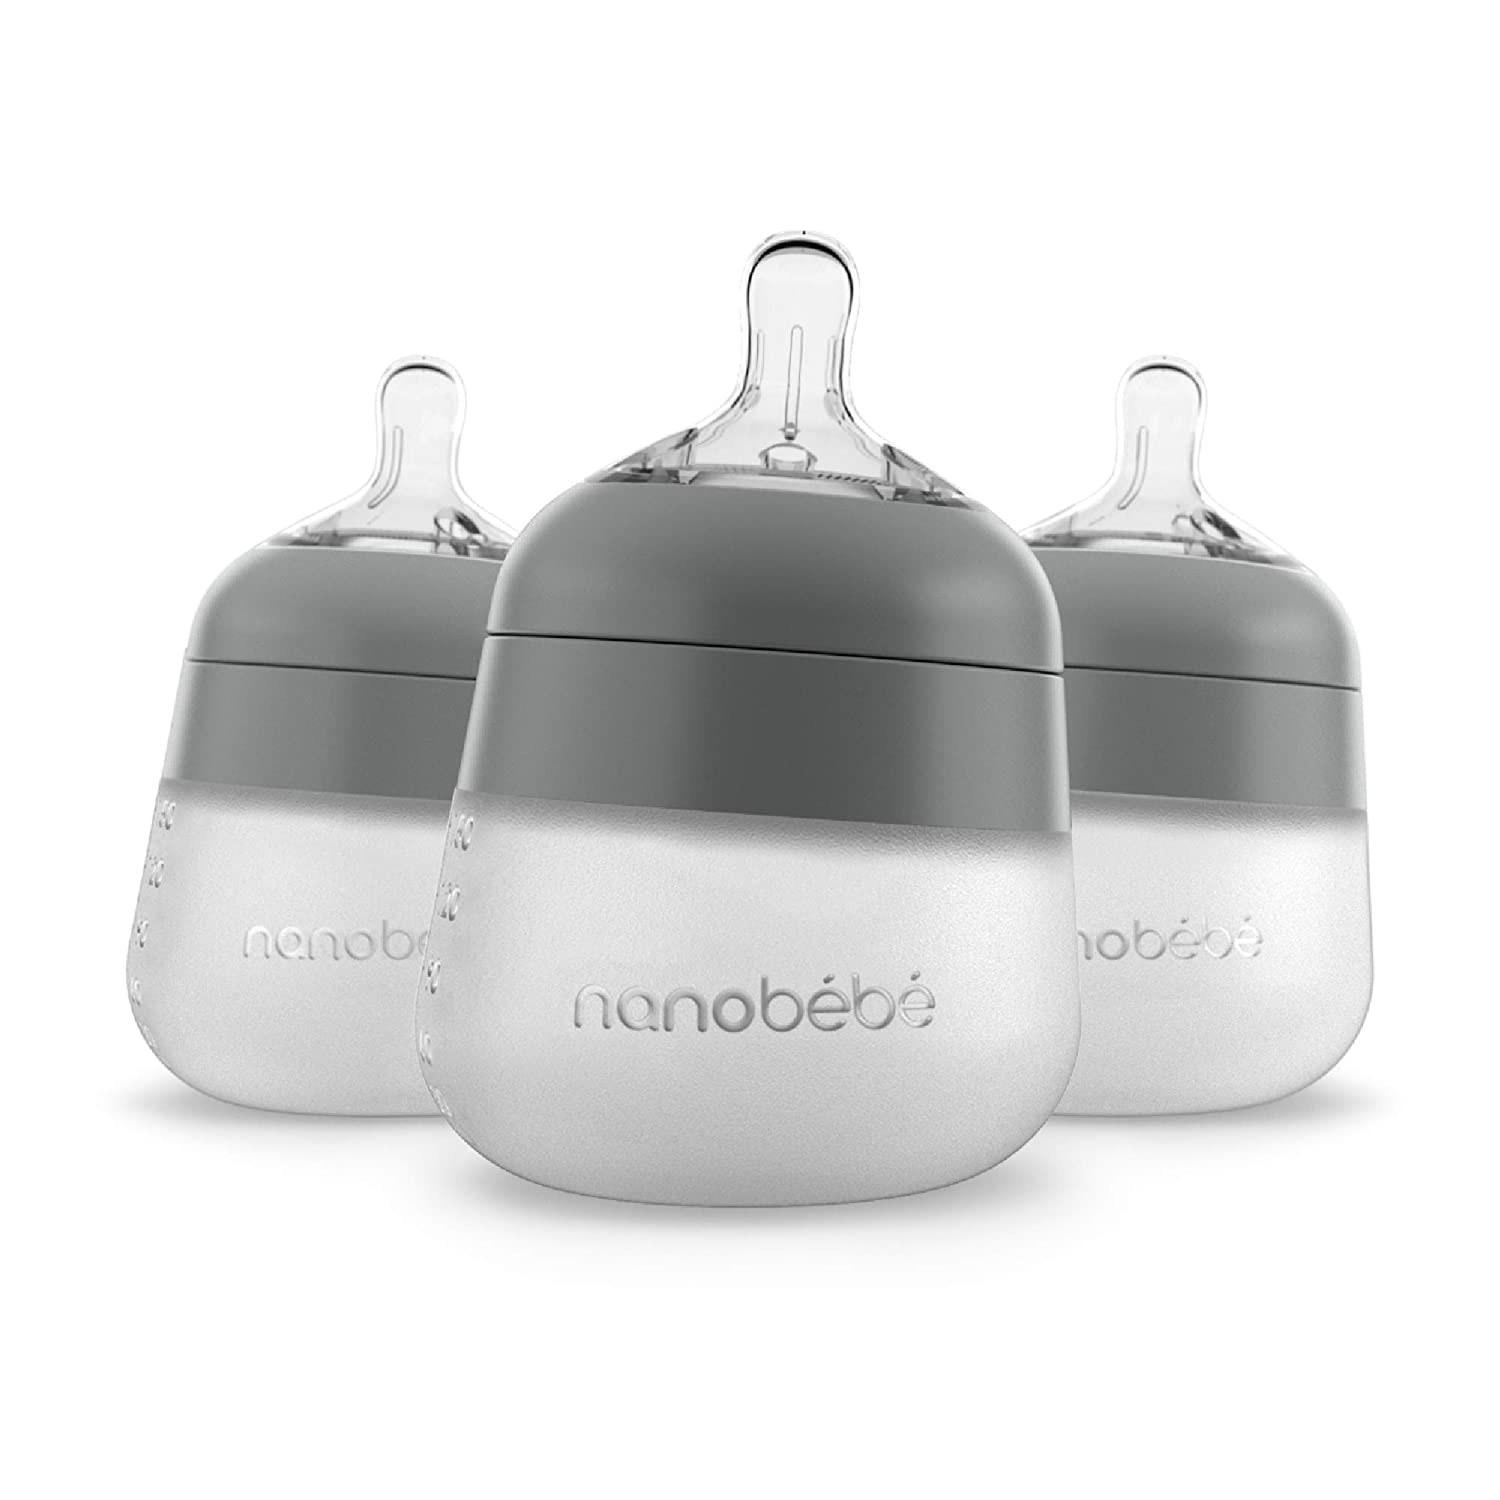 Three silicone baby bottles in grey